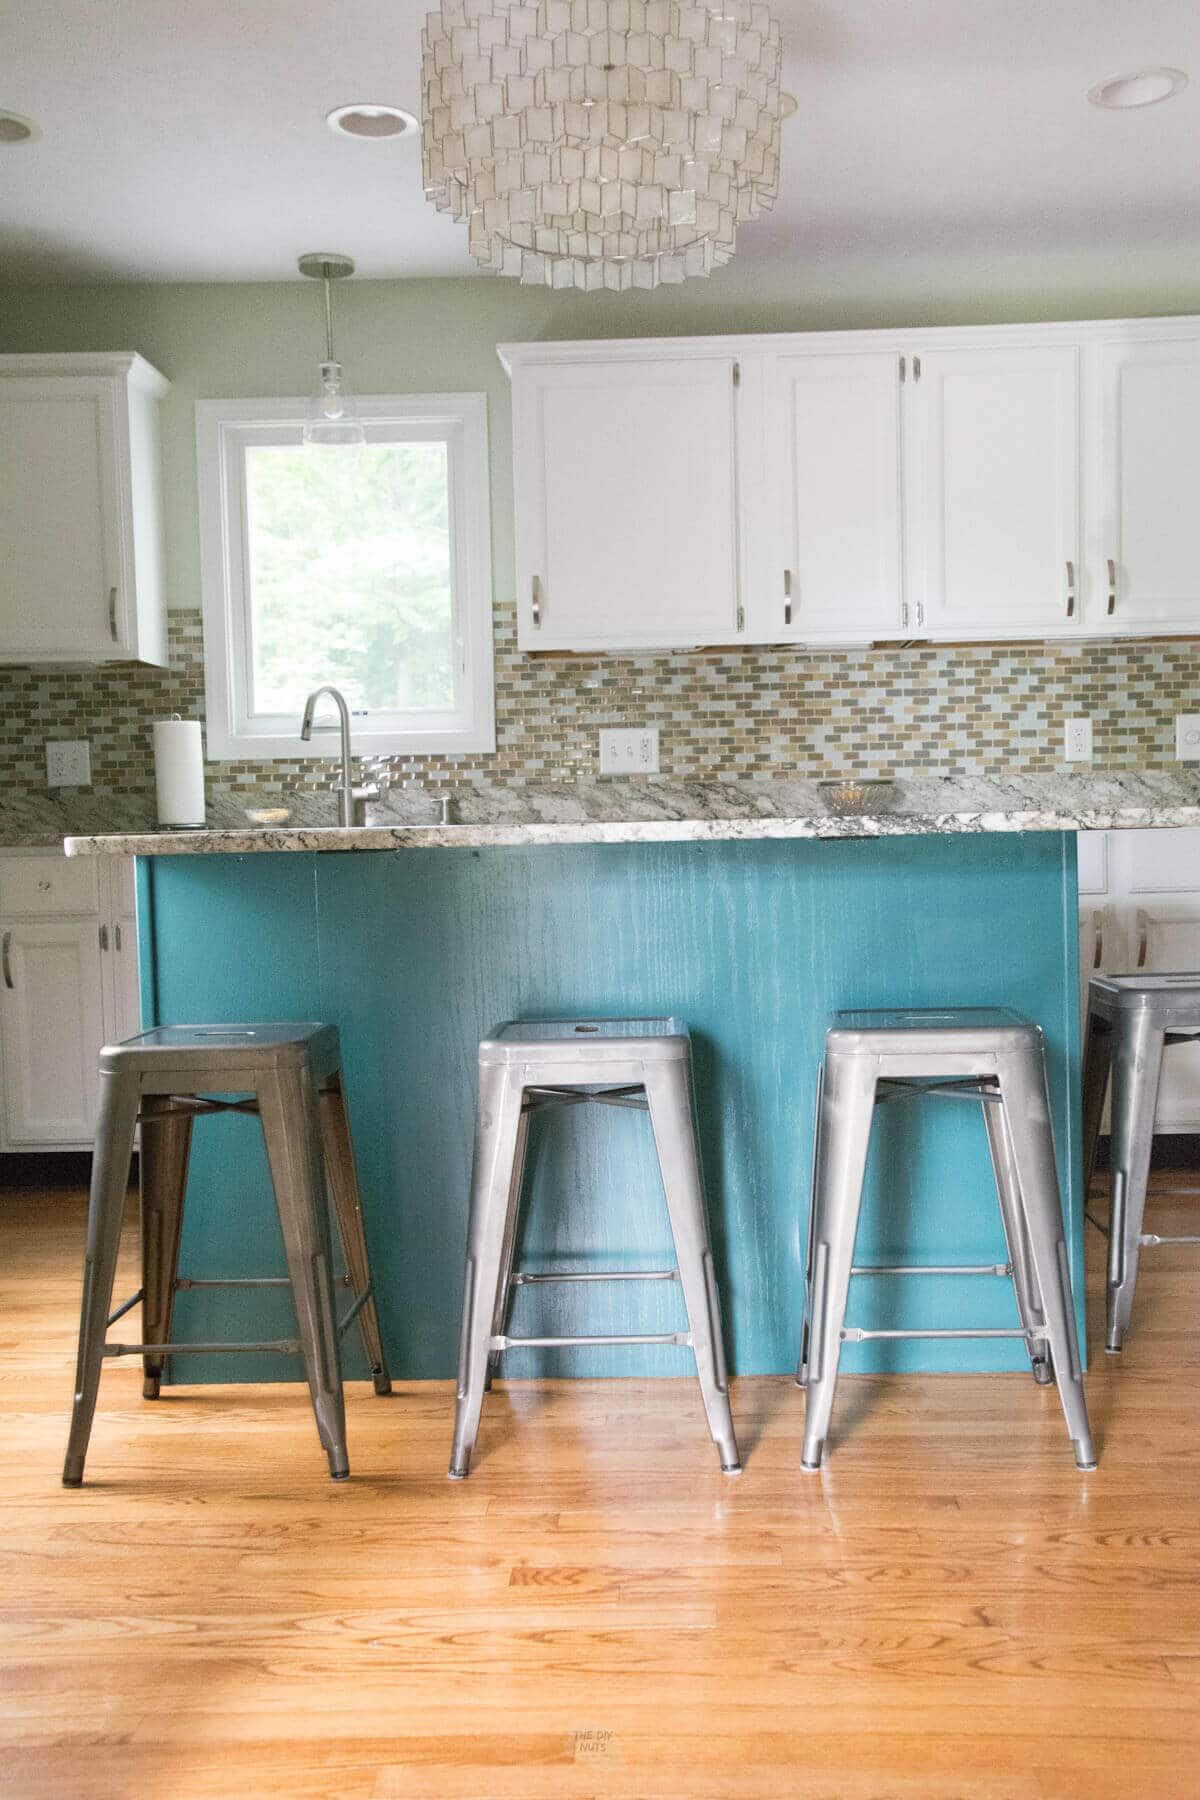 blue green painted kitchen island with metal bar stools and white painted kitchen cabinets.